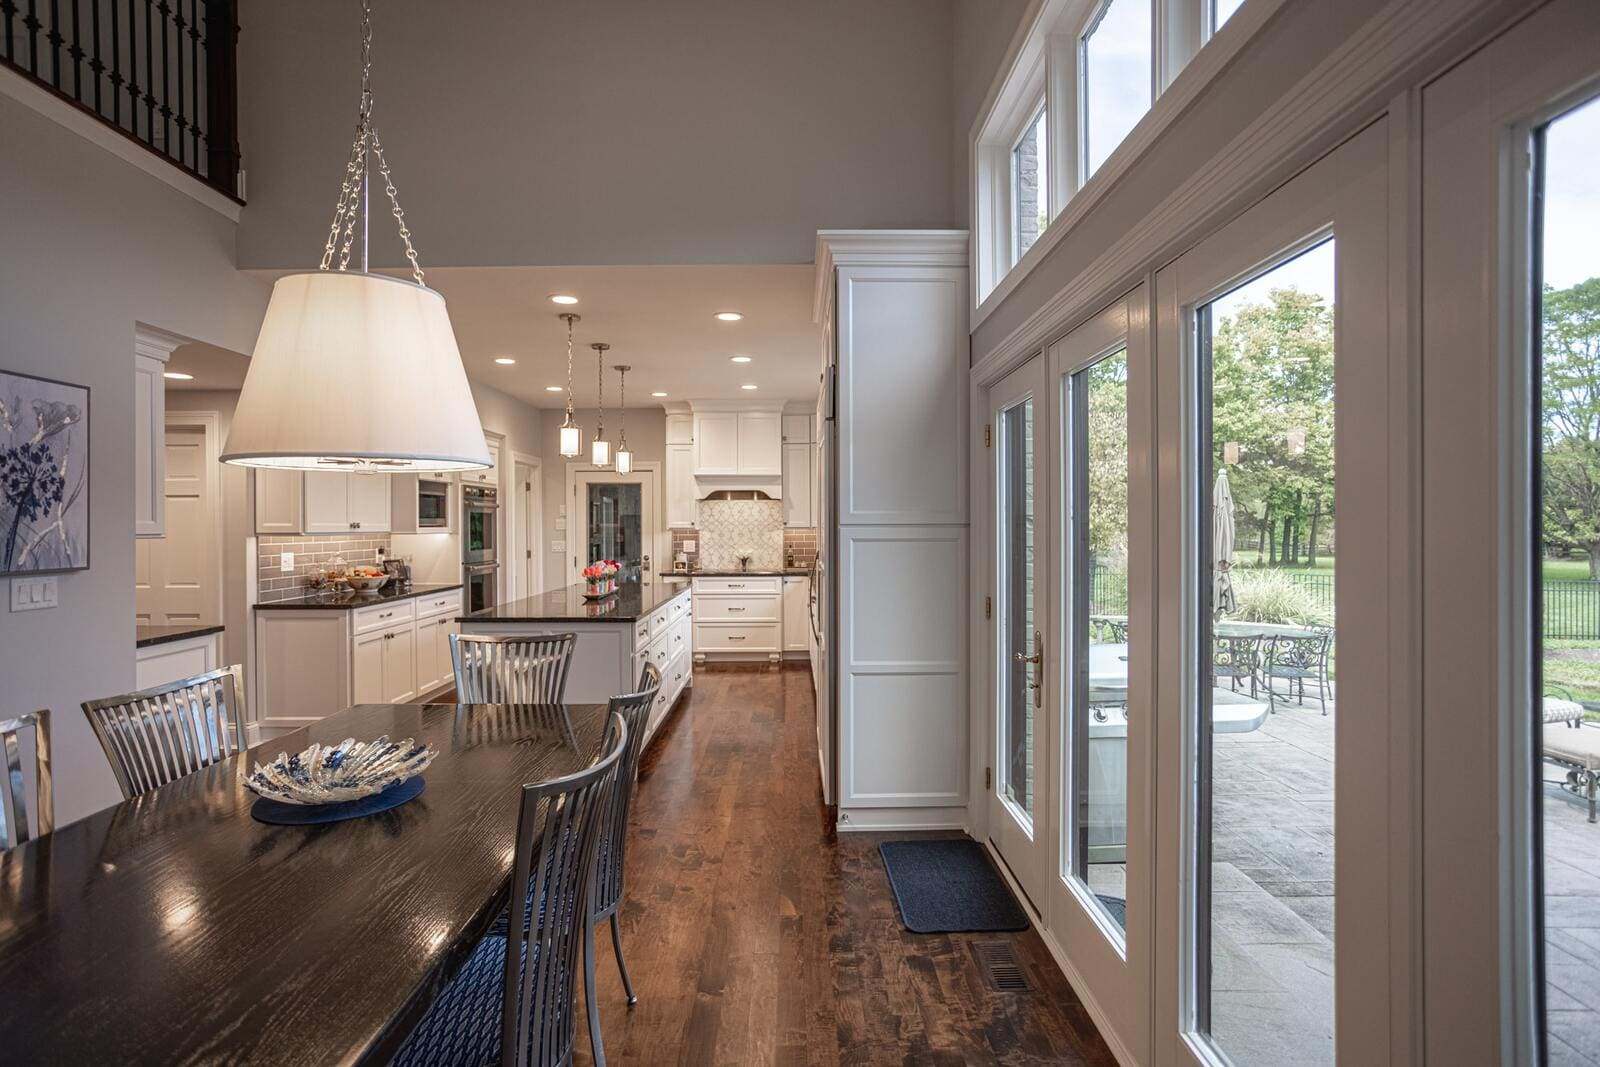 Open concept kitchen design with doors to back patio